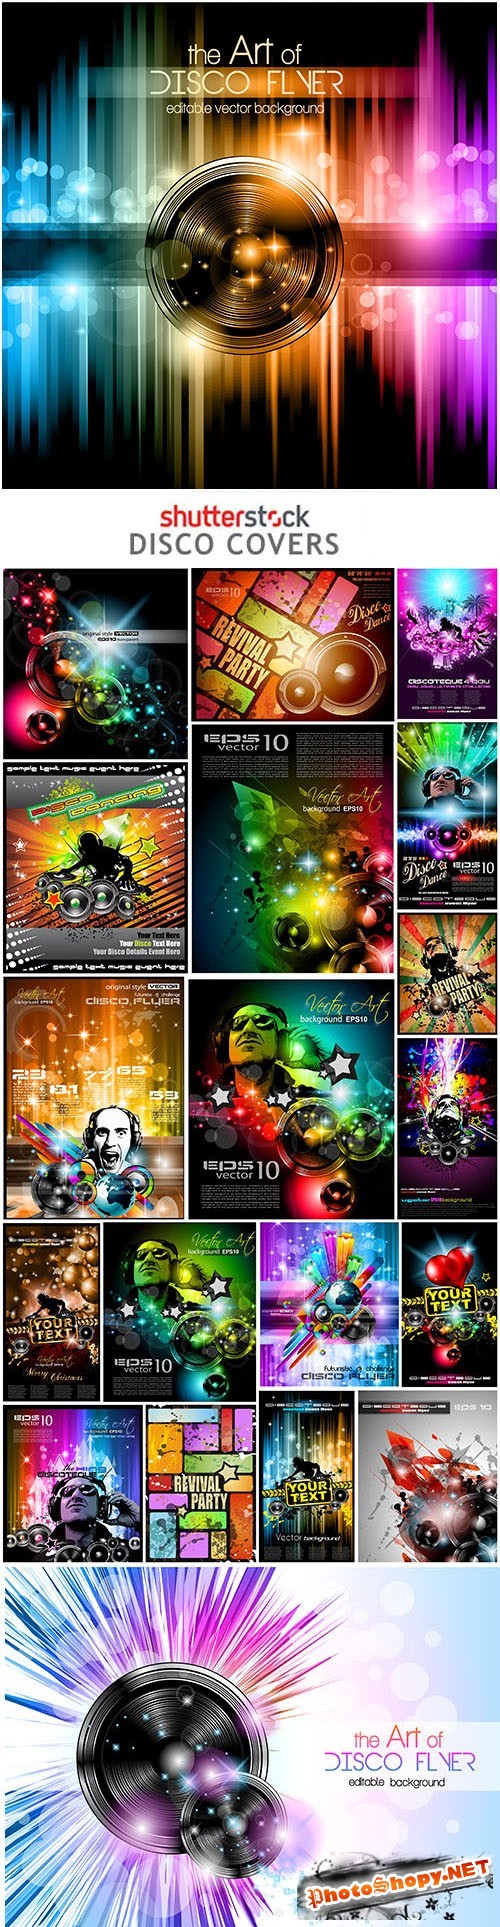 Shutterstock - Disco Covers 25xEPS